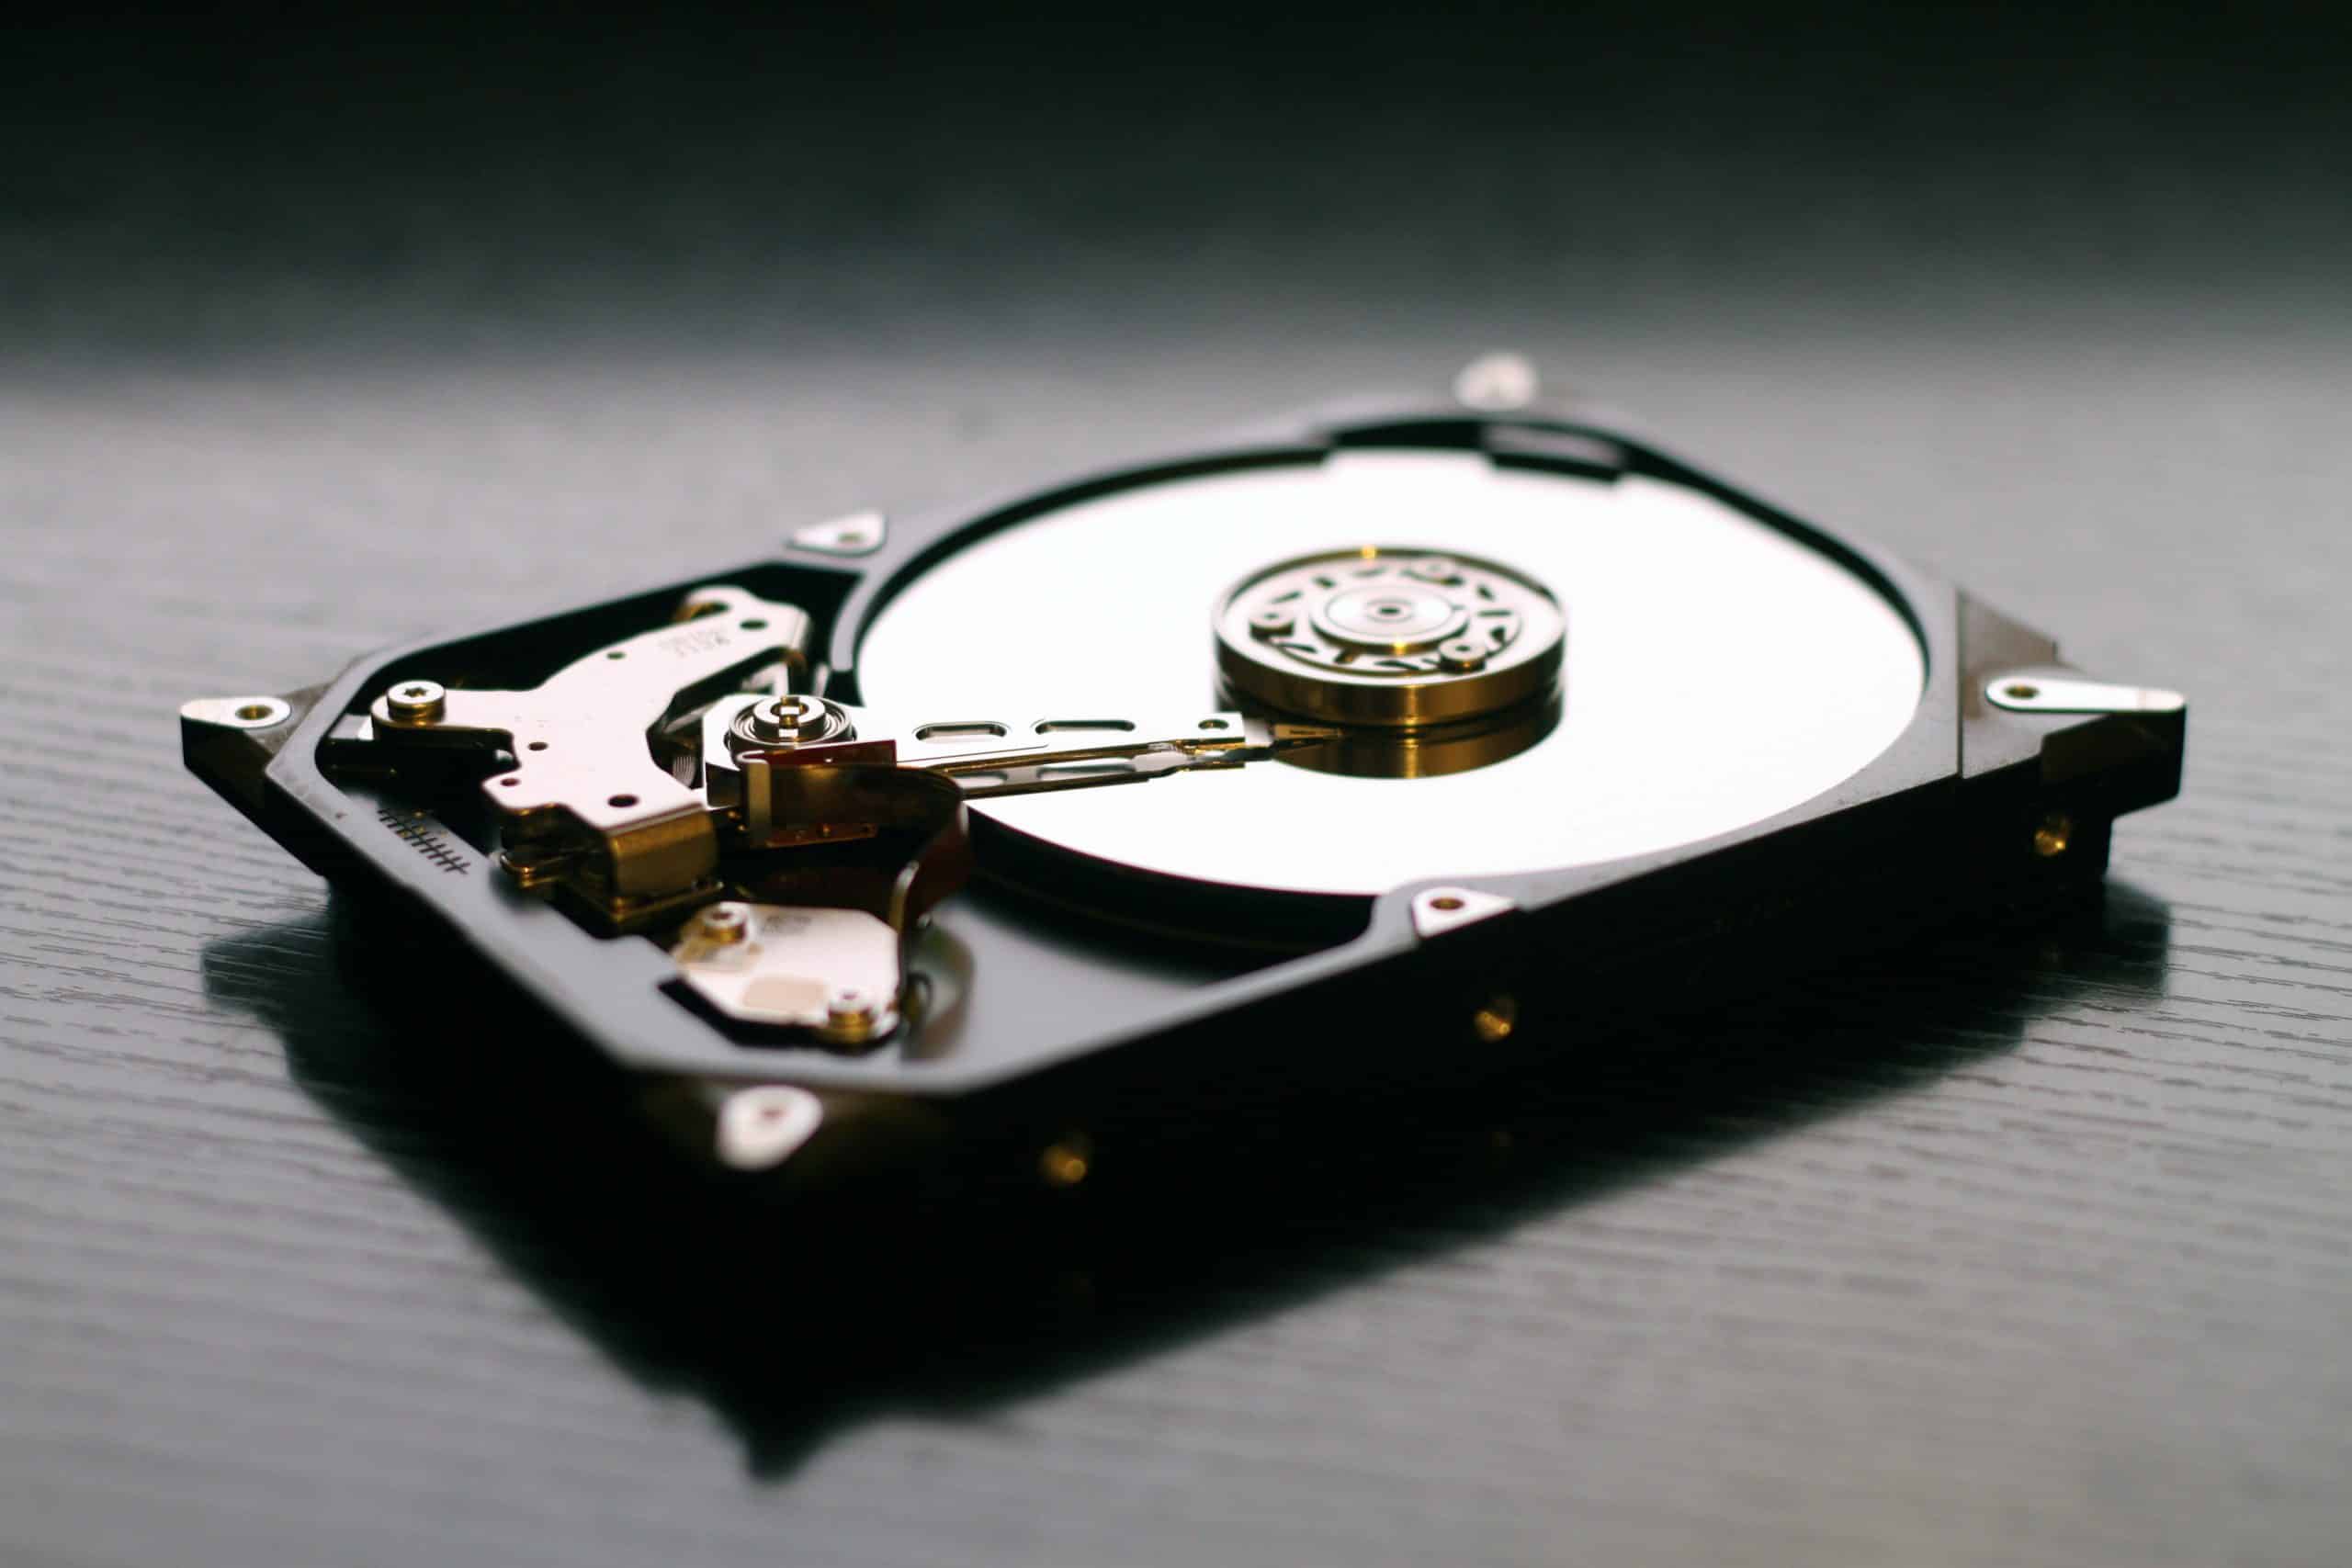 What causes your hard drive to crash?